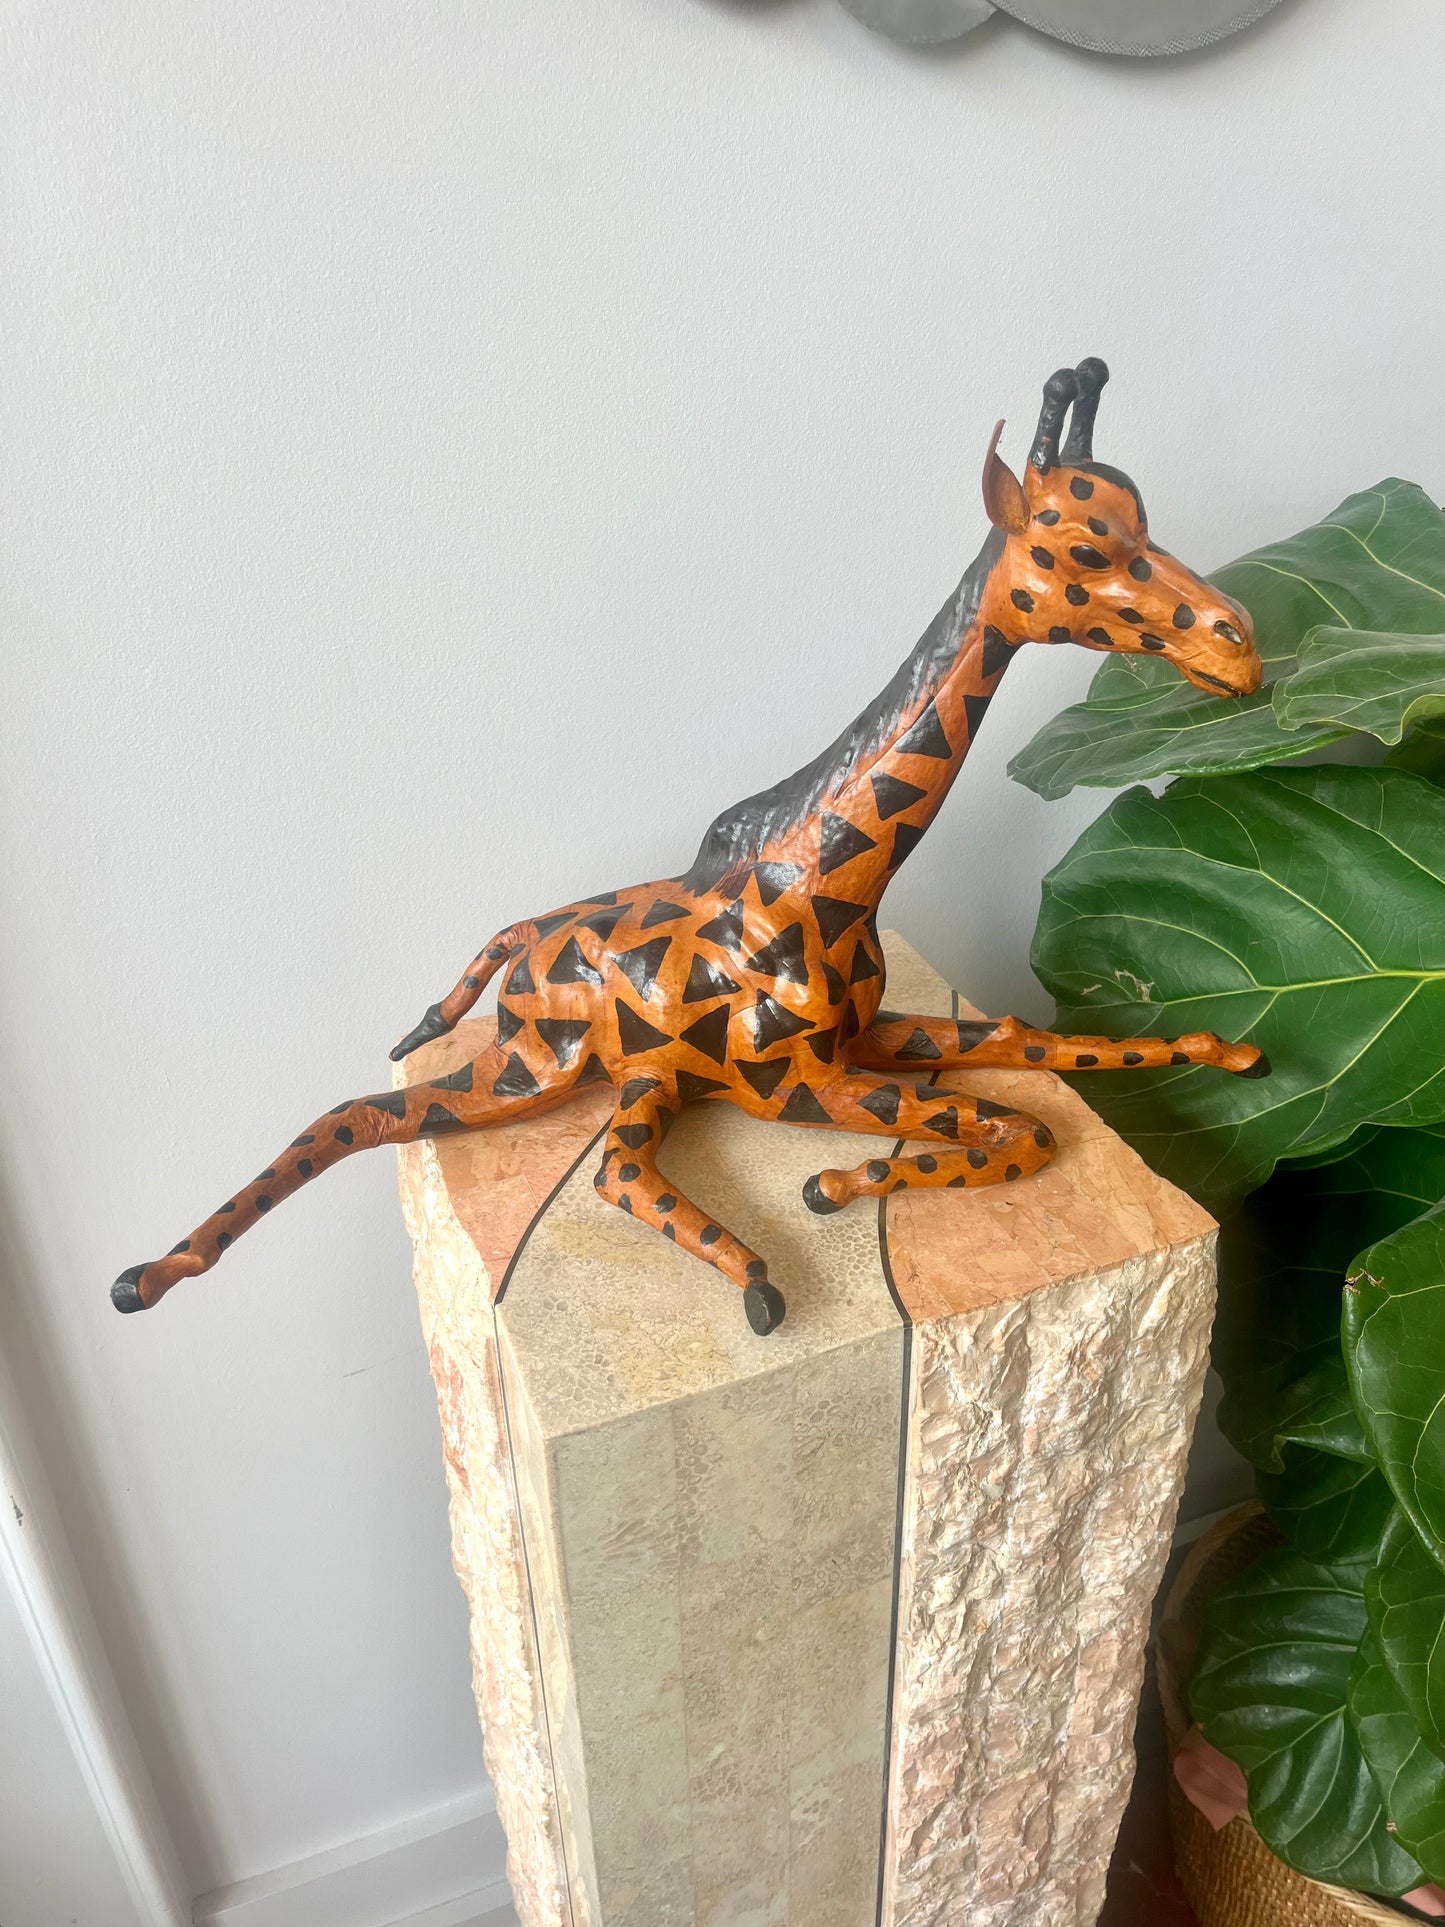 Vintage Leather Wrapped Giraffe Statue